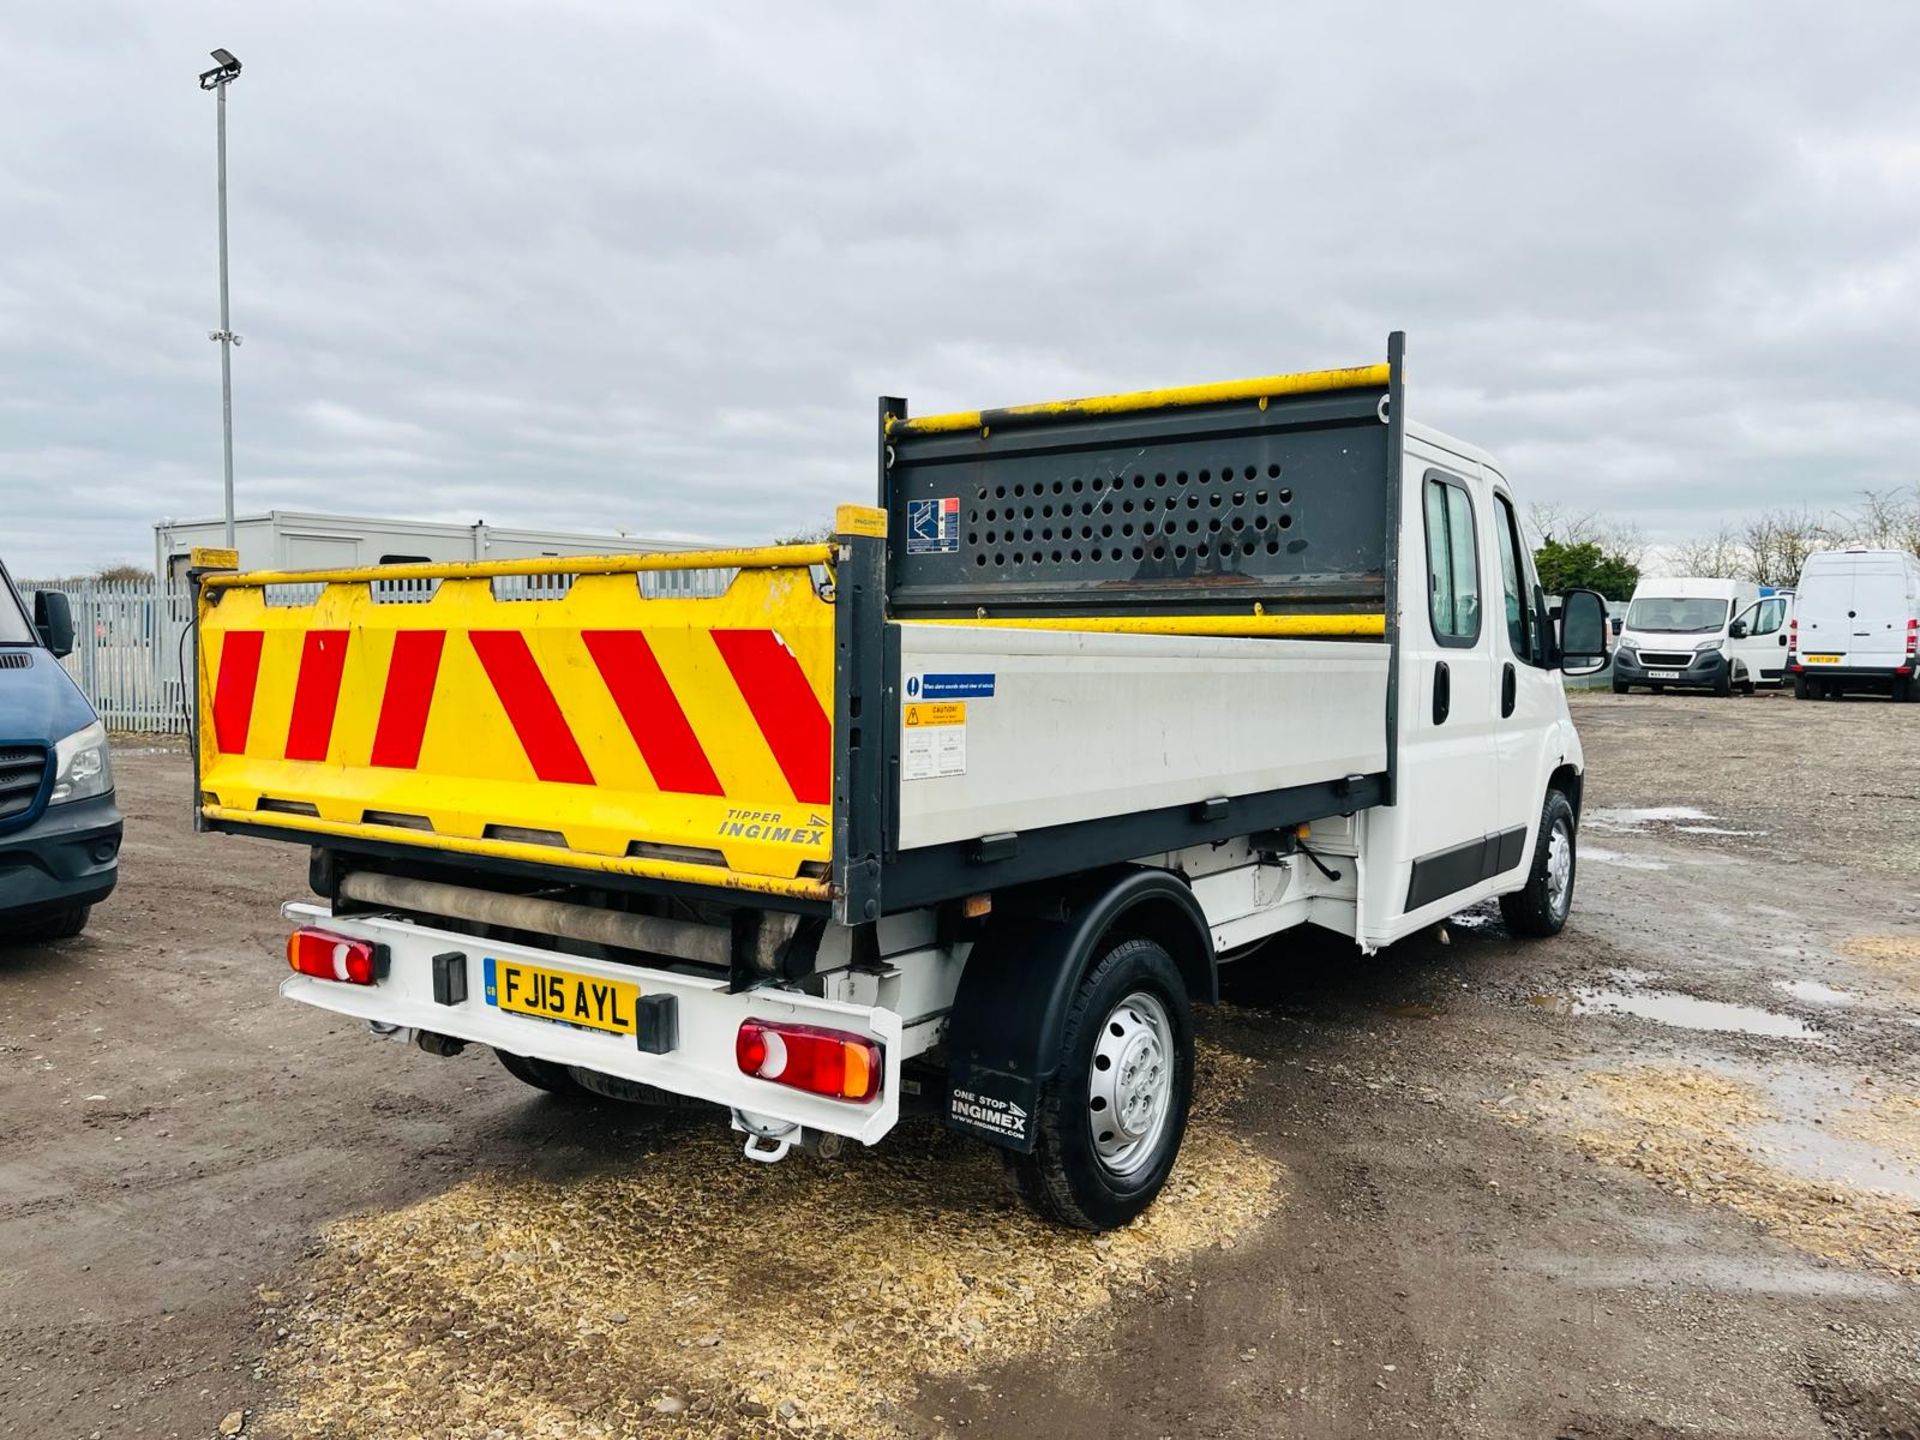 ** ON SALE ** Peugeot Boxer 335 2.2 Hdi 130 L3 CrewCab Tipper 2015 '15 Reg' ONLY 56,897 mile - Image 12 of 31